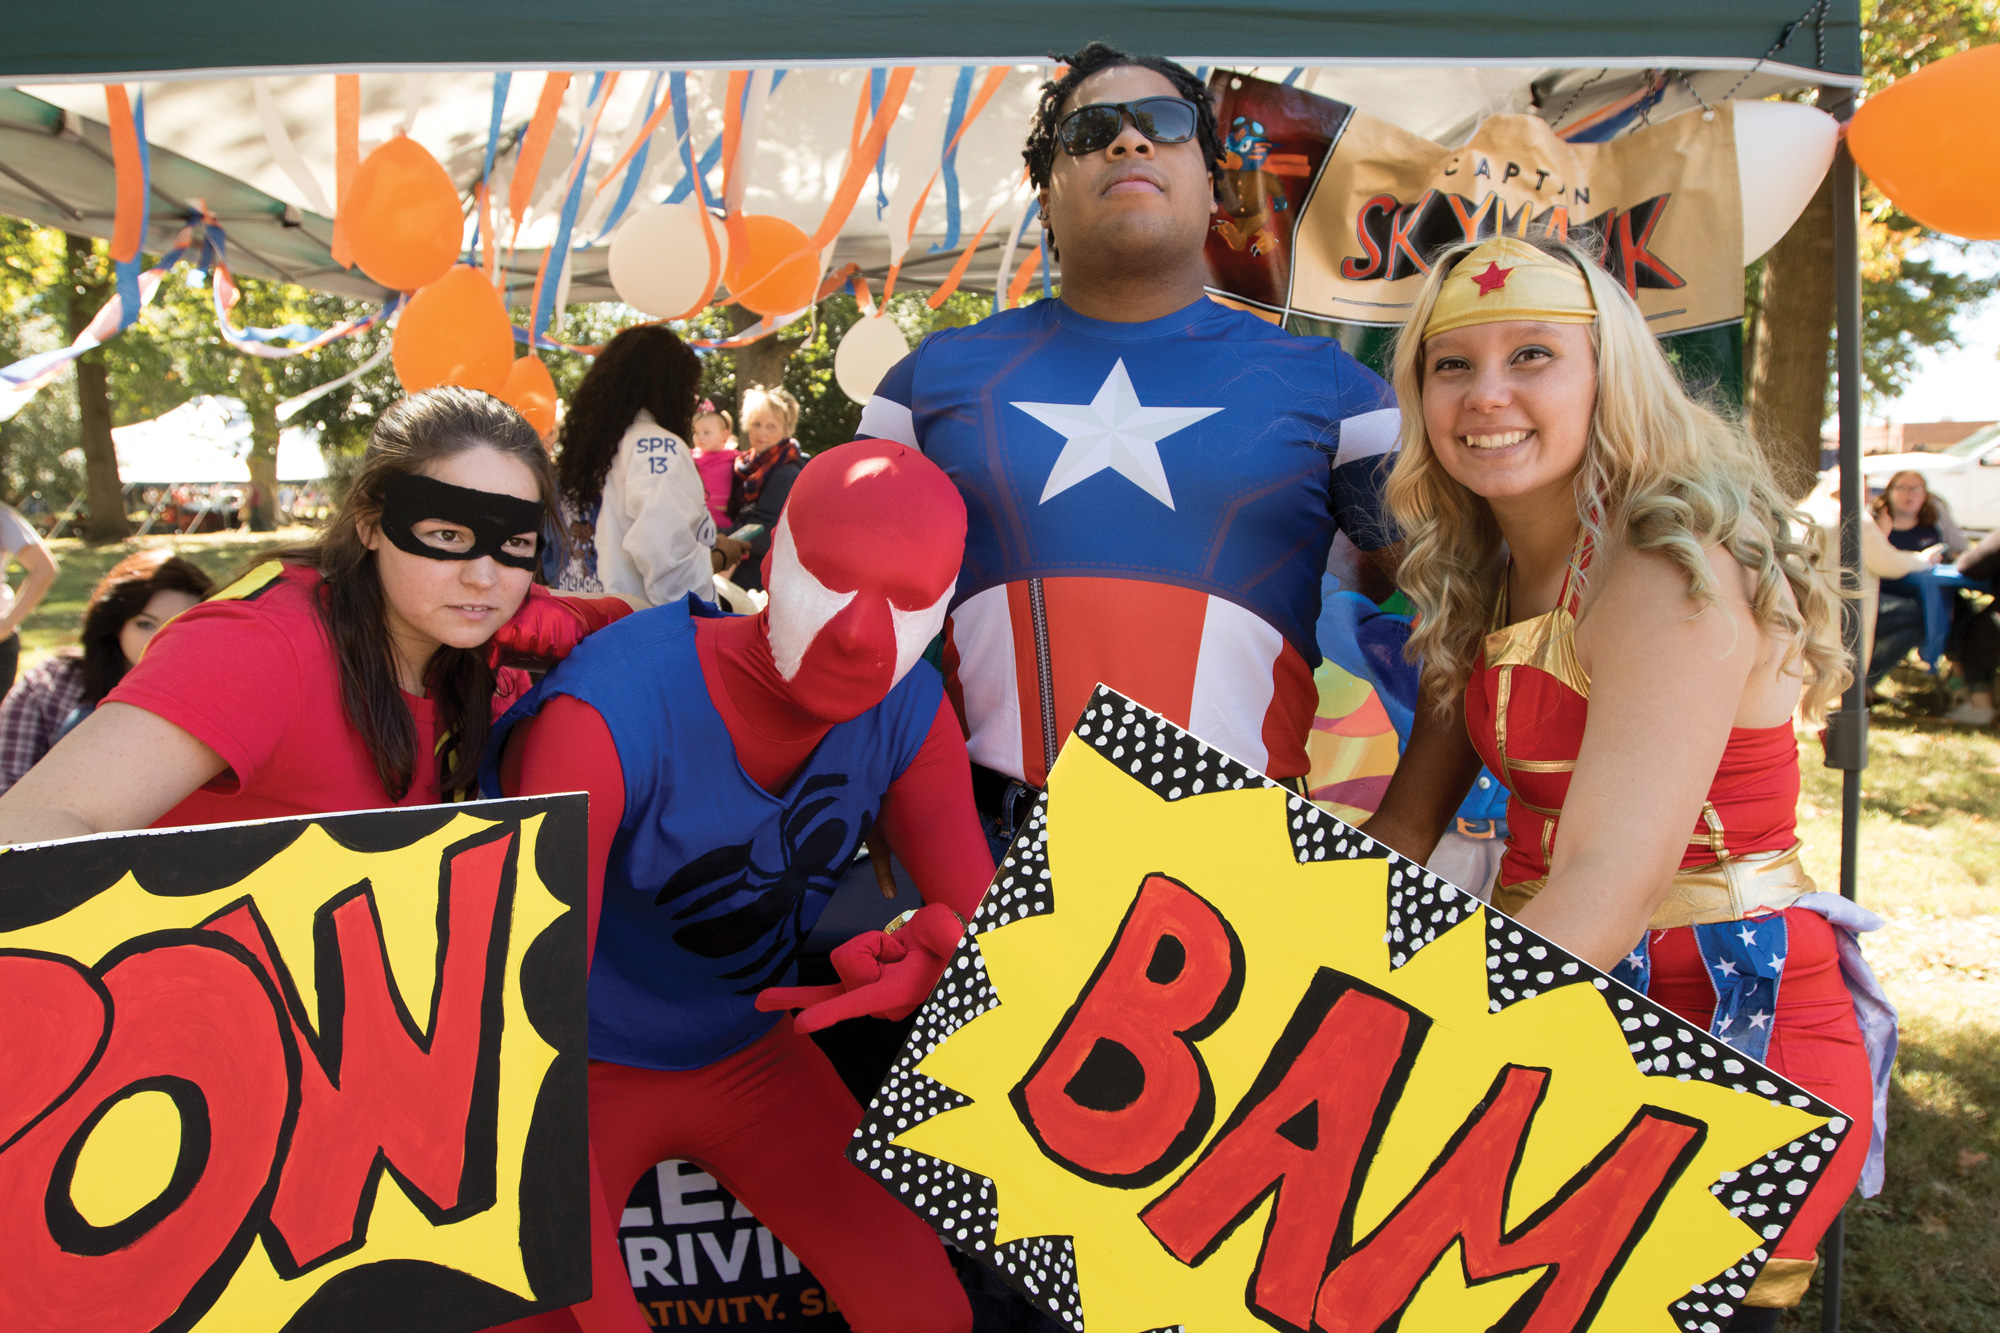 Students dressed as Robin, Spiderman, Captain America and Wonder Woman